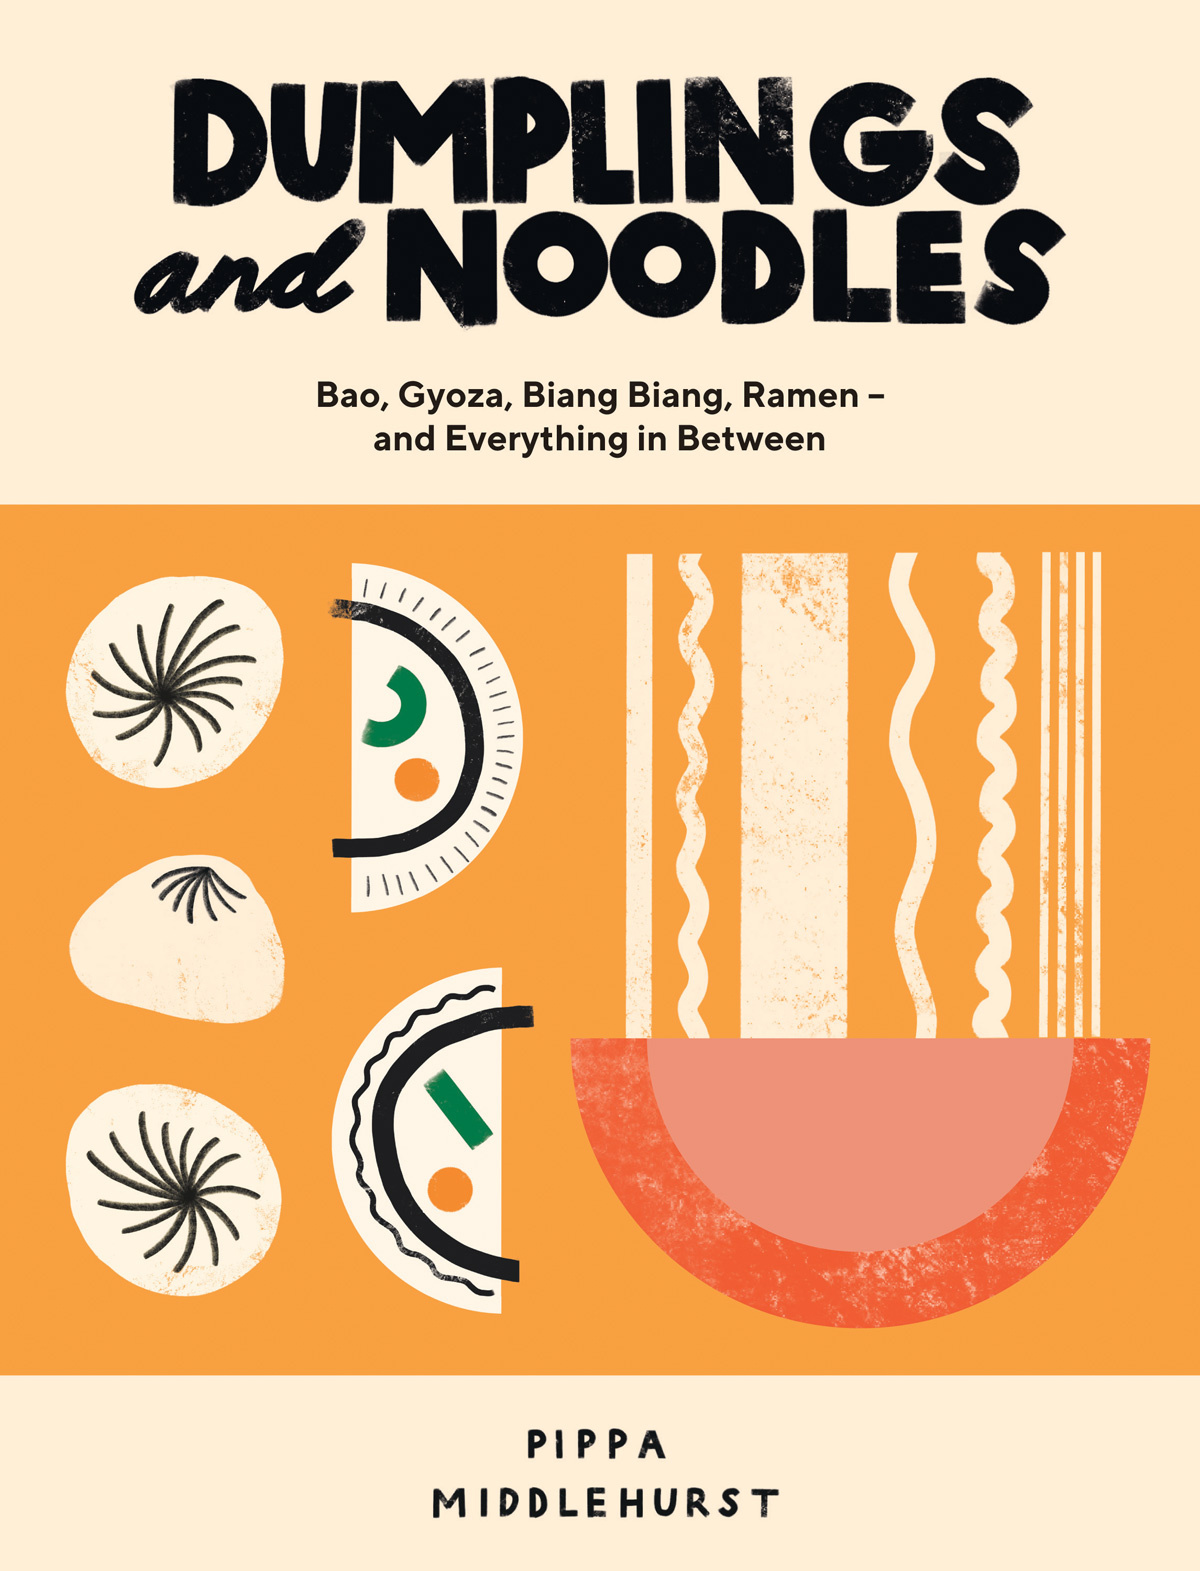 Book cover of Dumplings and Noodles by Pippa Middlehurst